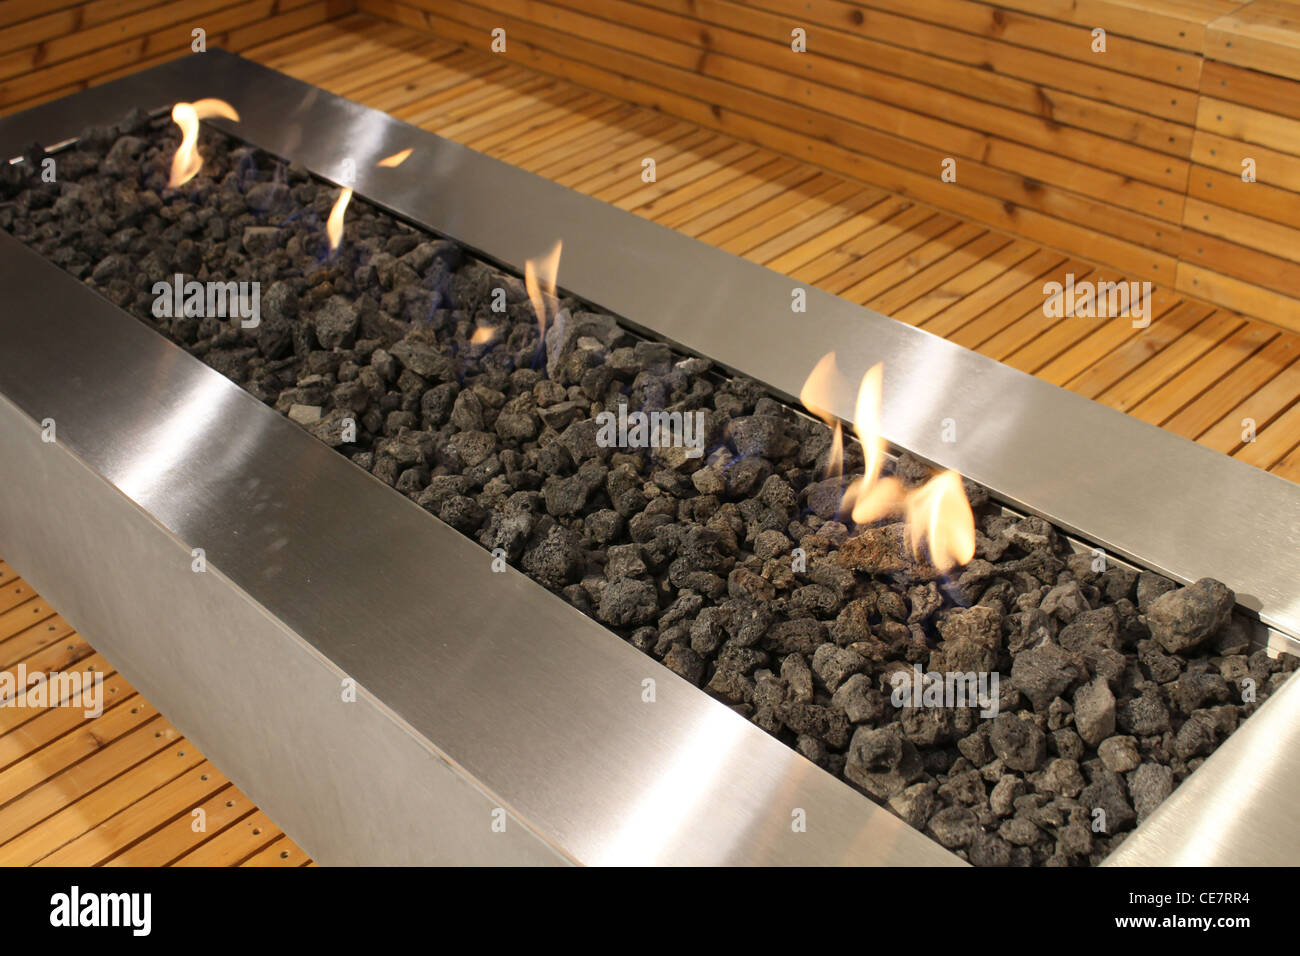 outdoor patio fireplace charcoal Stock Photo